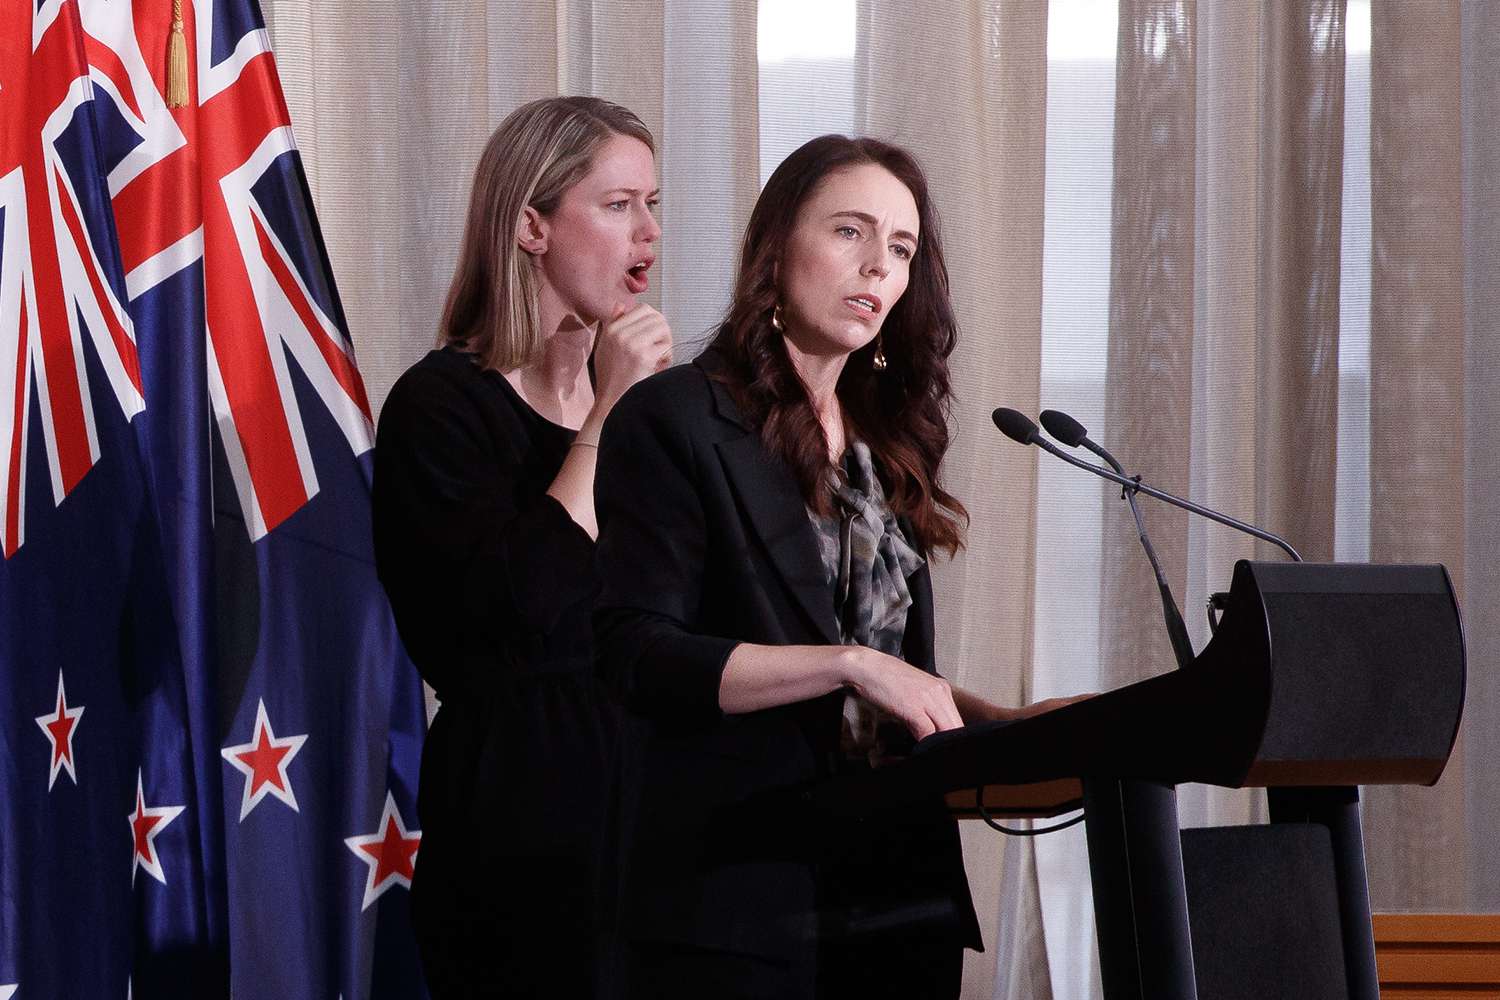 Prime Minister Jacinda Ardern introduces a new traffic light system when dealing with Covid-19 onwards the Banquet Hall in Parliament on October 22, 2021 in Wellington, New Zealand.